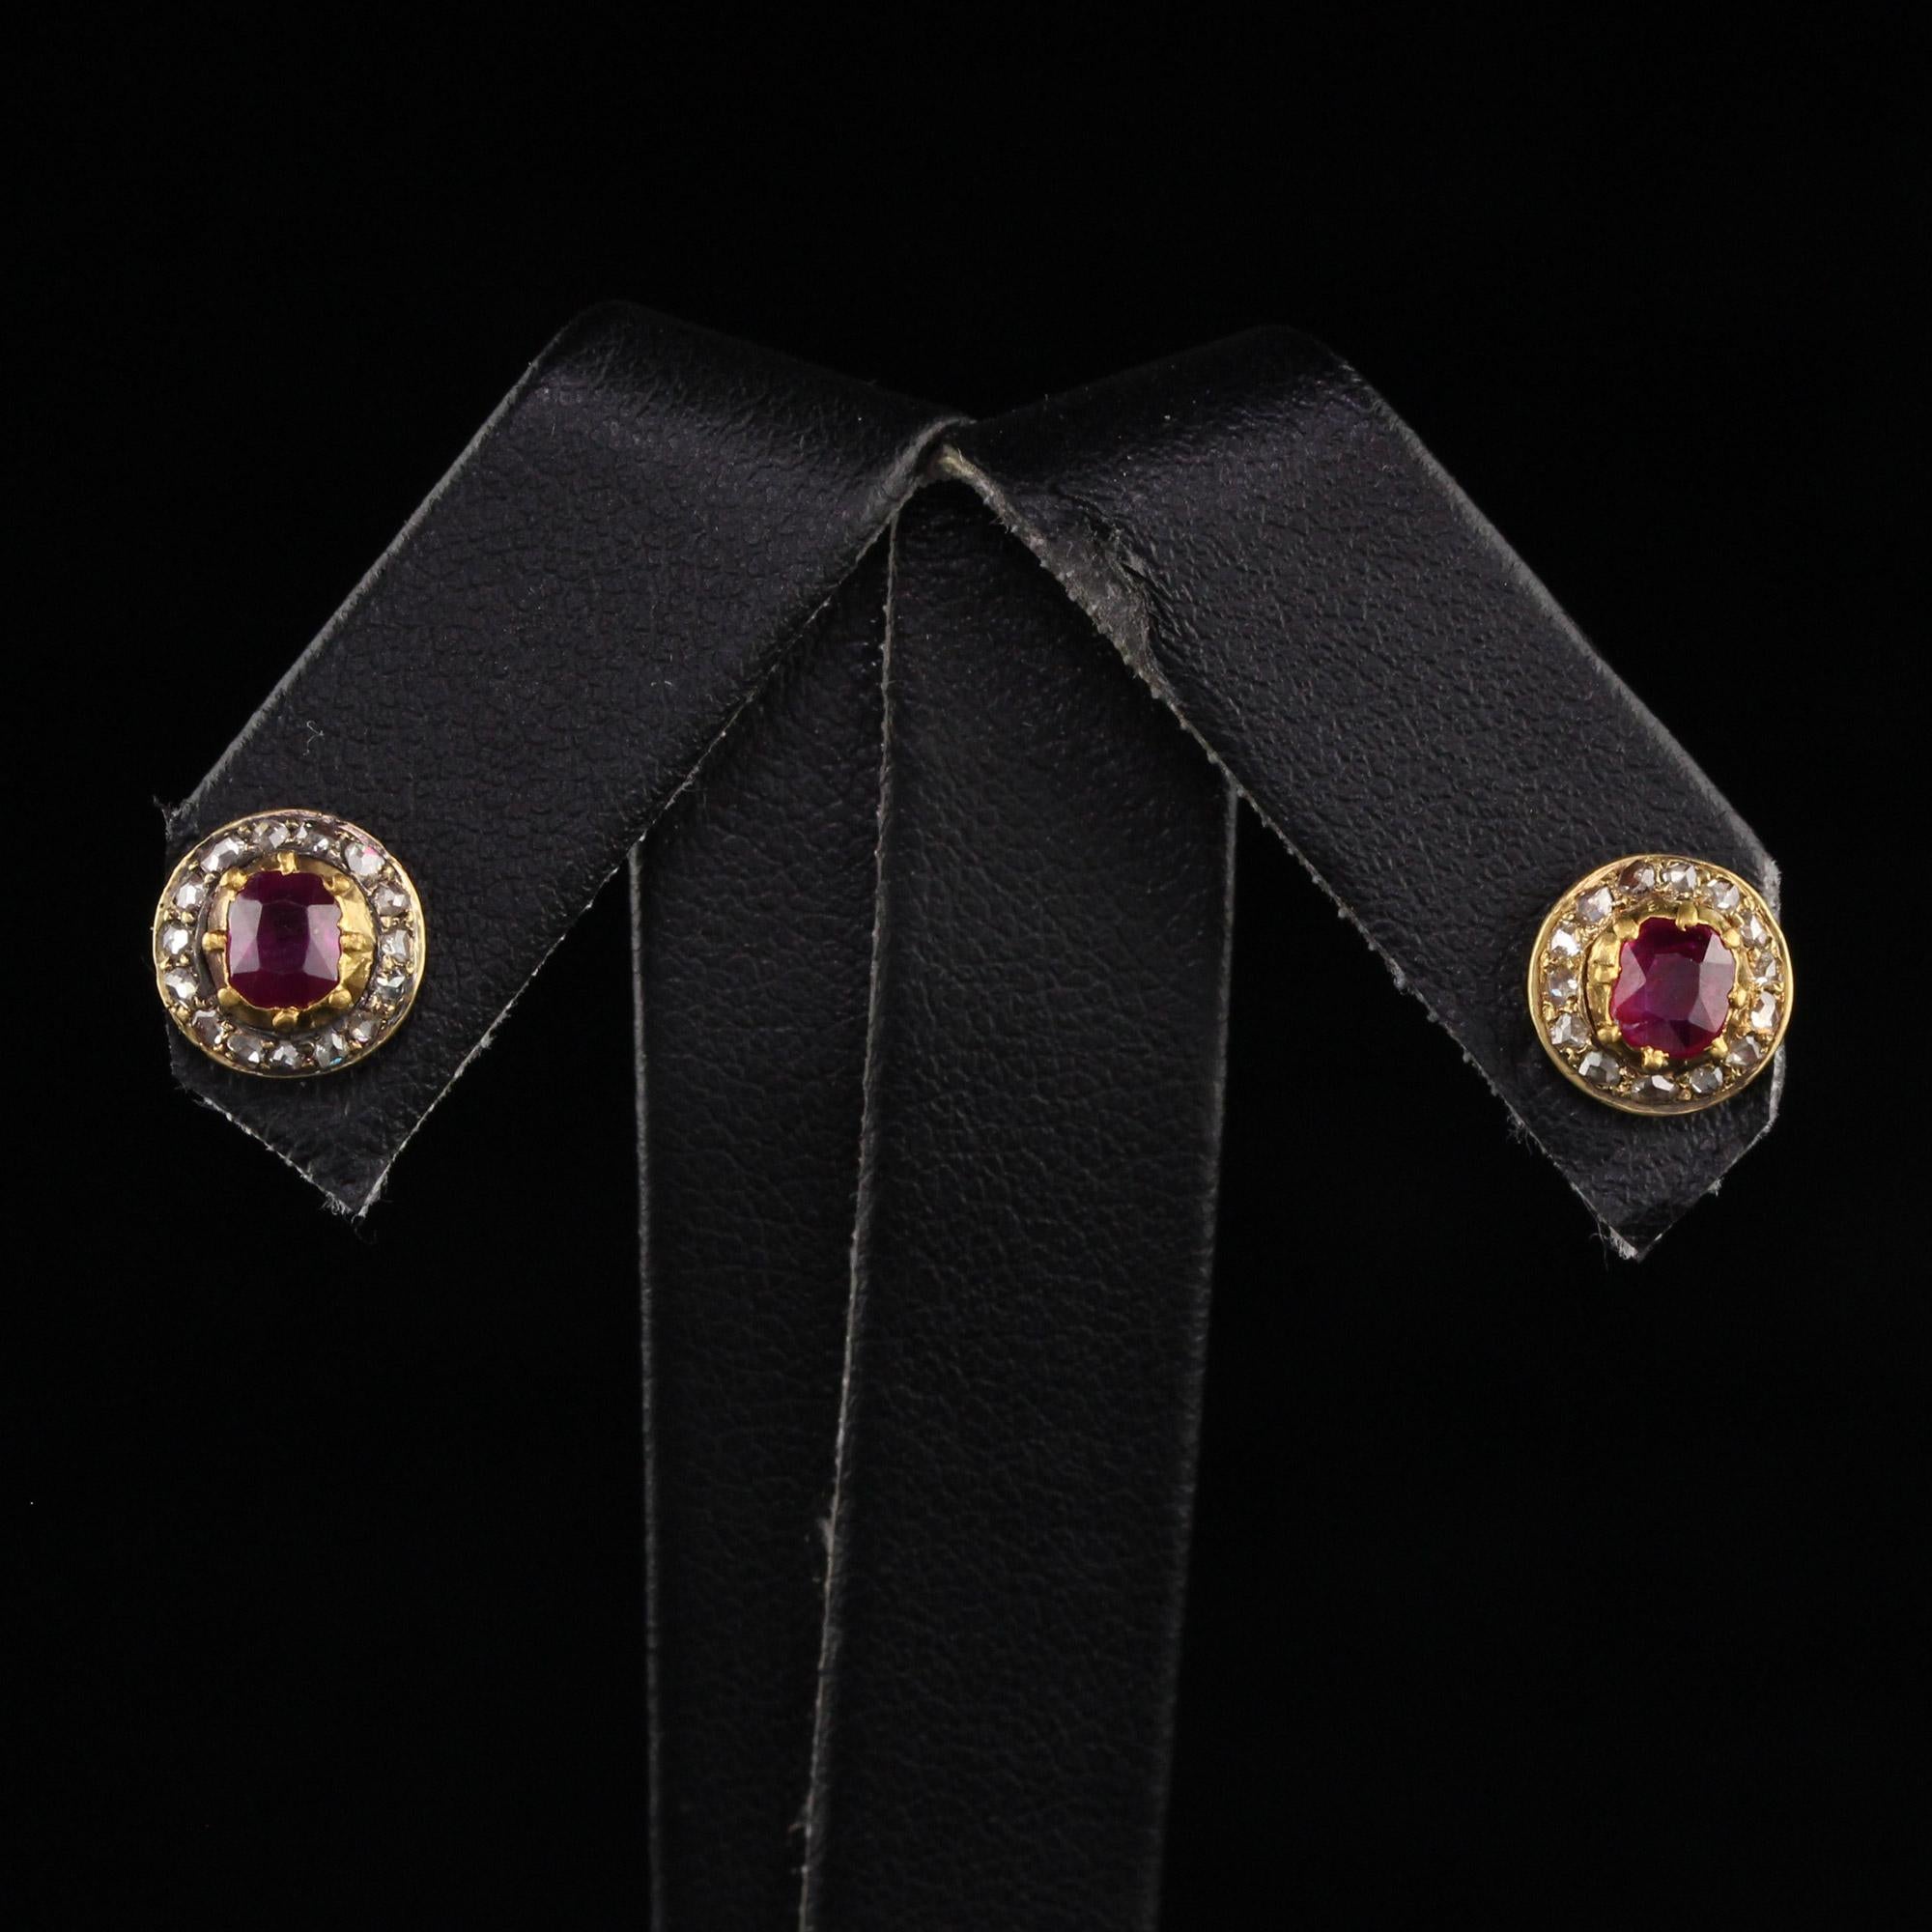 Antique Victorian 18k Yellow Gold Burma Ruby and Diamond Stud Earrings 1